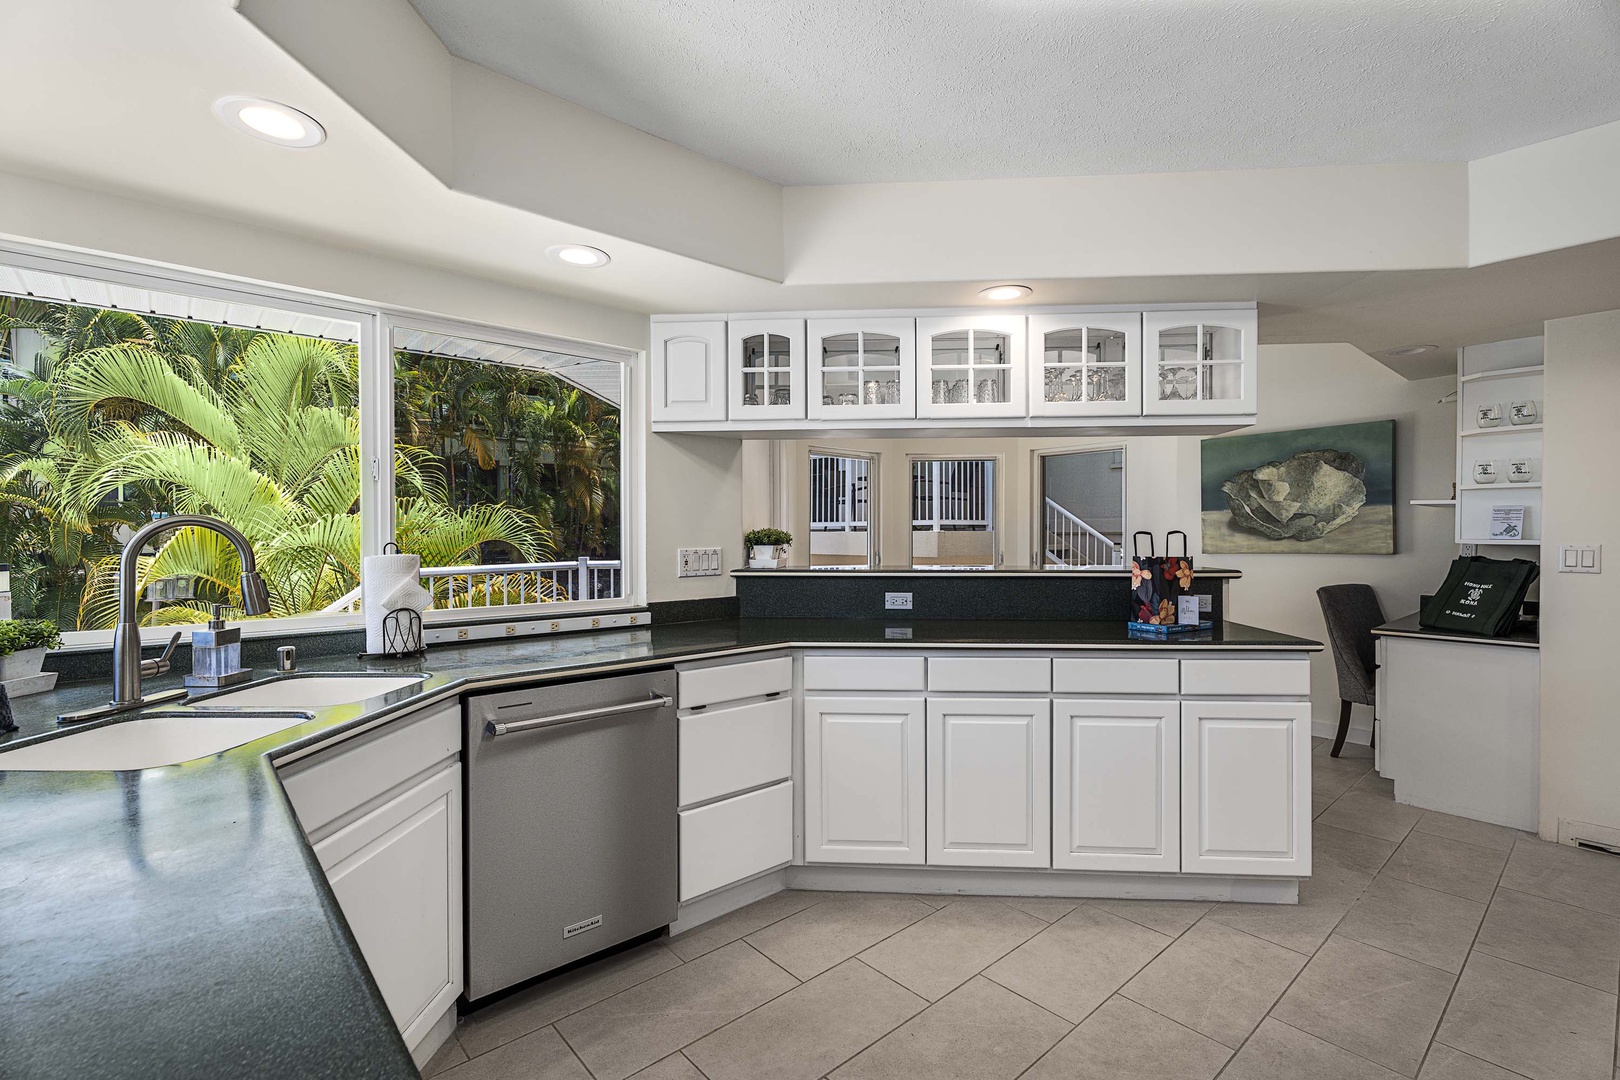 Kailua-Kona Vacation Rentals, Honu Hale - Open sightlines throughout the kitchen with room for up to 4 to prepare together